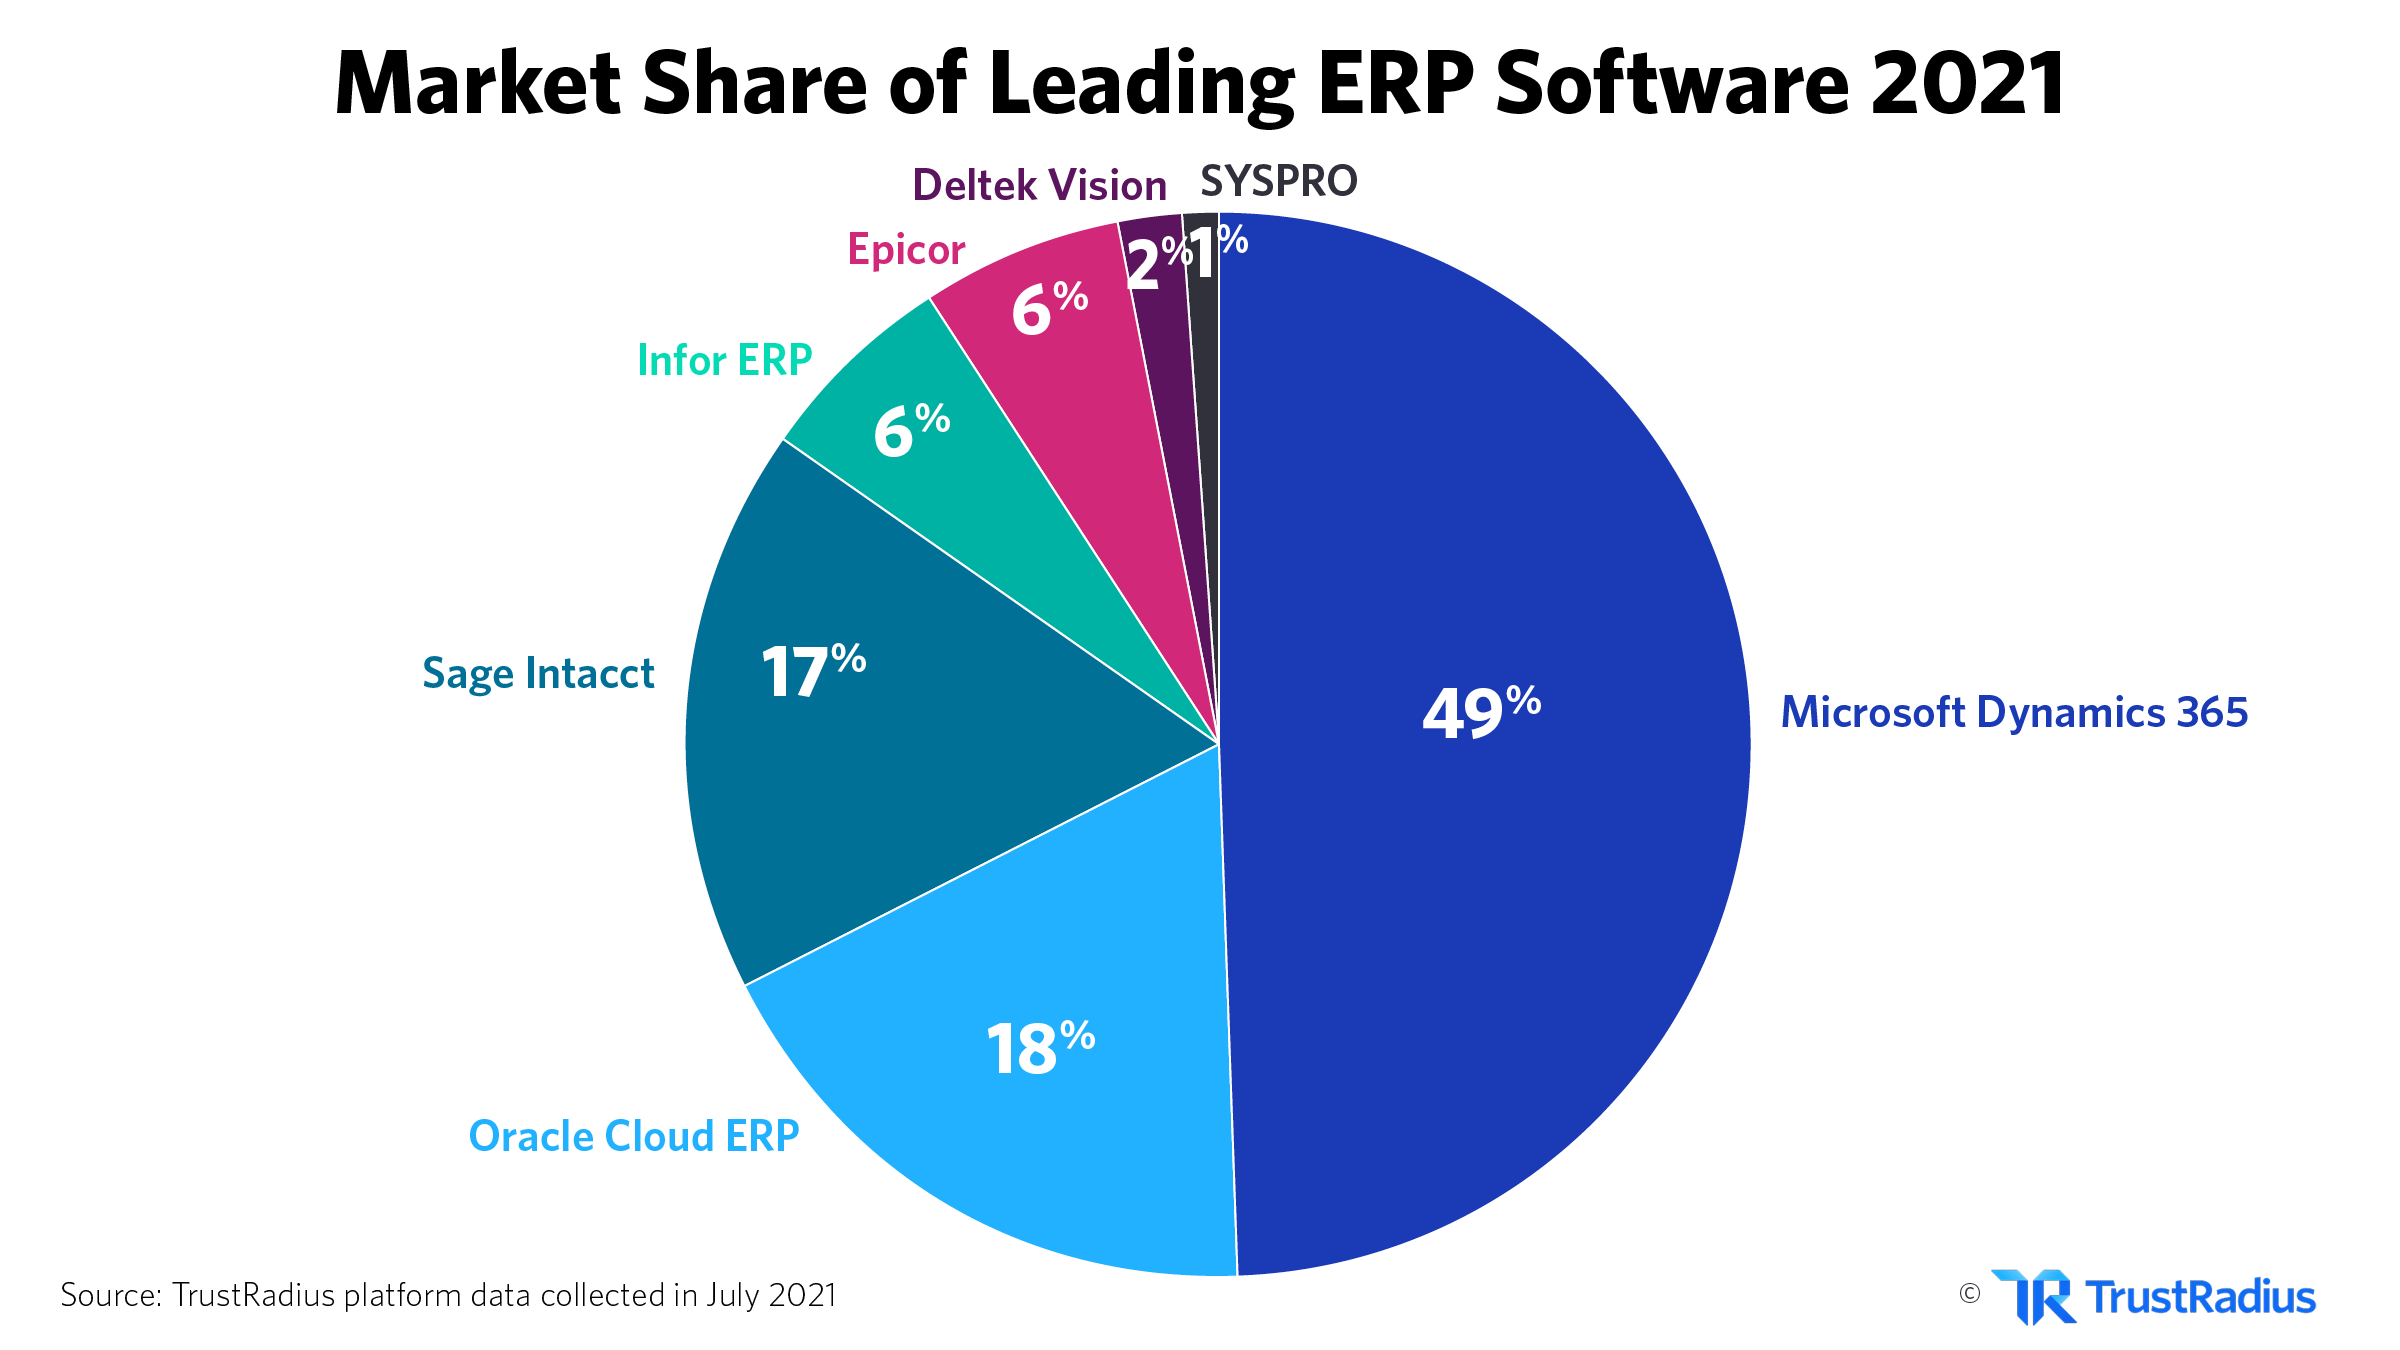 Market share of ERP leaders in 2021